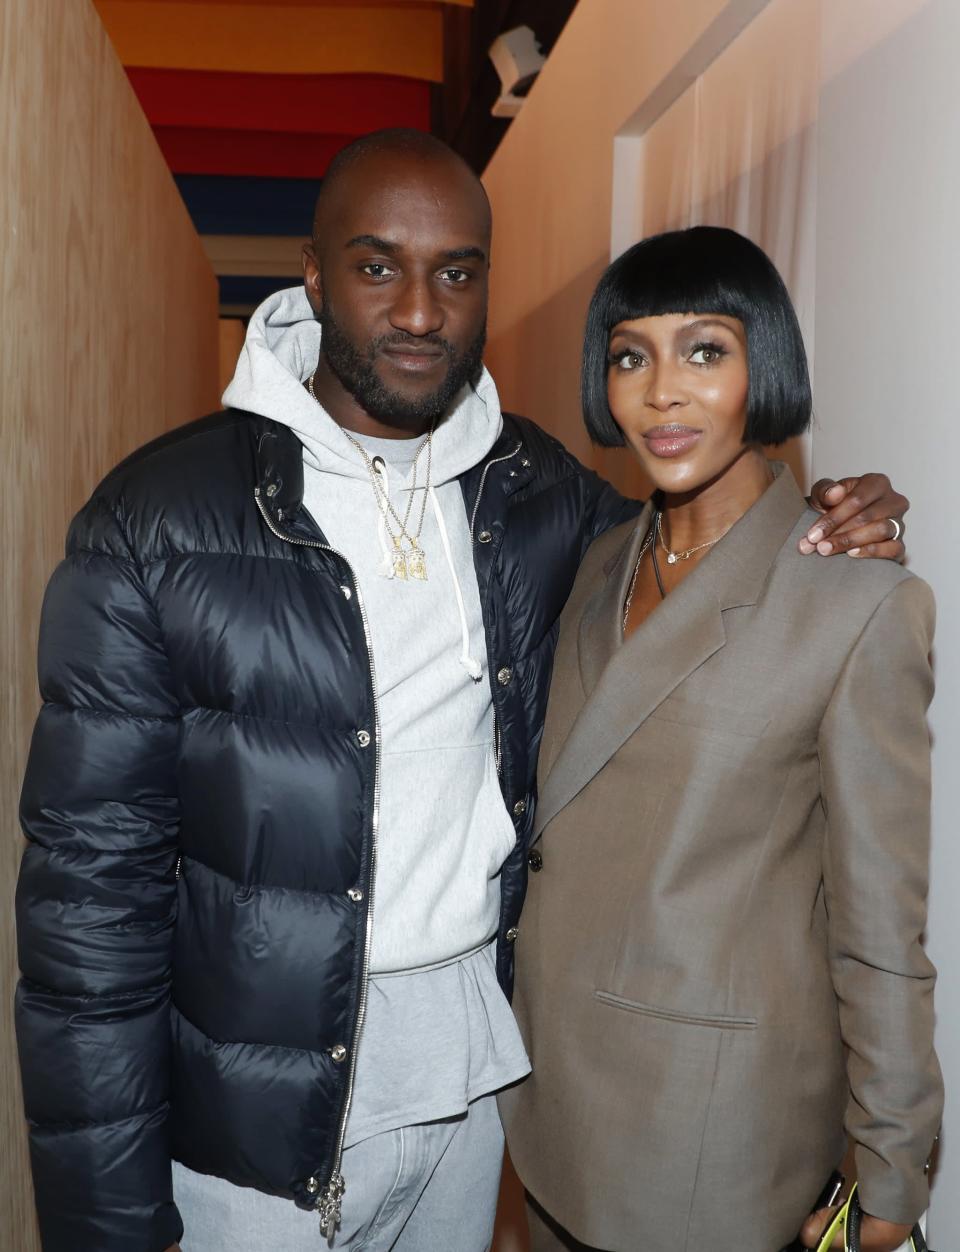 <p>On Nov. 29, <a href="https://www.instagram.com/tv/CW3lidSD7rp/" class="link " rel="nofollow noopener" target="_blank" data-ylk="slk:Naomi Campbell shared a lengthy tribute to Virgil">Naomi Campbell shared a lengthy tribute to Virgil</a> on her Instagram account. "Today is not the end it's the beginning of your beautiful and young legacy," part of her statement read. "You always said you were an engineer and Architect can't wait to see what you have in store for the world .this side and the other .. . It was an honor to walk for you in your. @off____white princess Diana inspired show . . . I love you always , KEEP US RISING FROM THE OTHER SIDE REST IN POWER 🕊🕊🤍🕊🕊🙏🏾. #LIVEYOURDREAMS 📸@kloss_films @edward_enninful @britishvogue"</p>